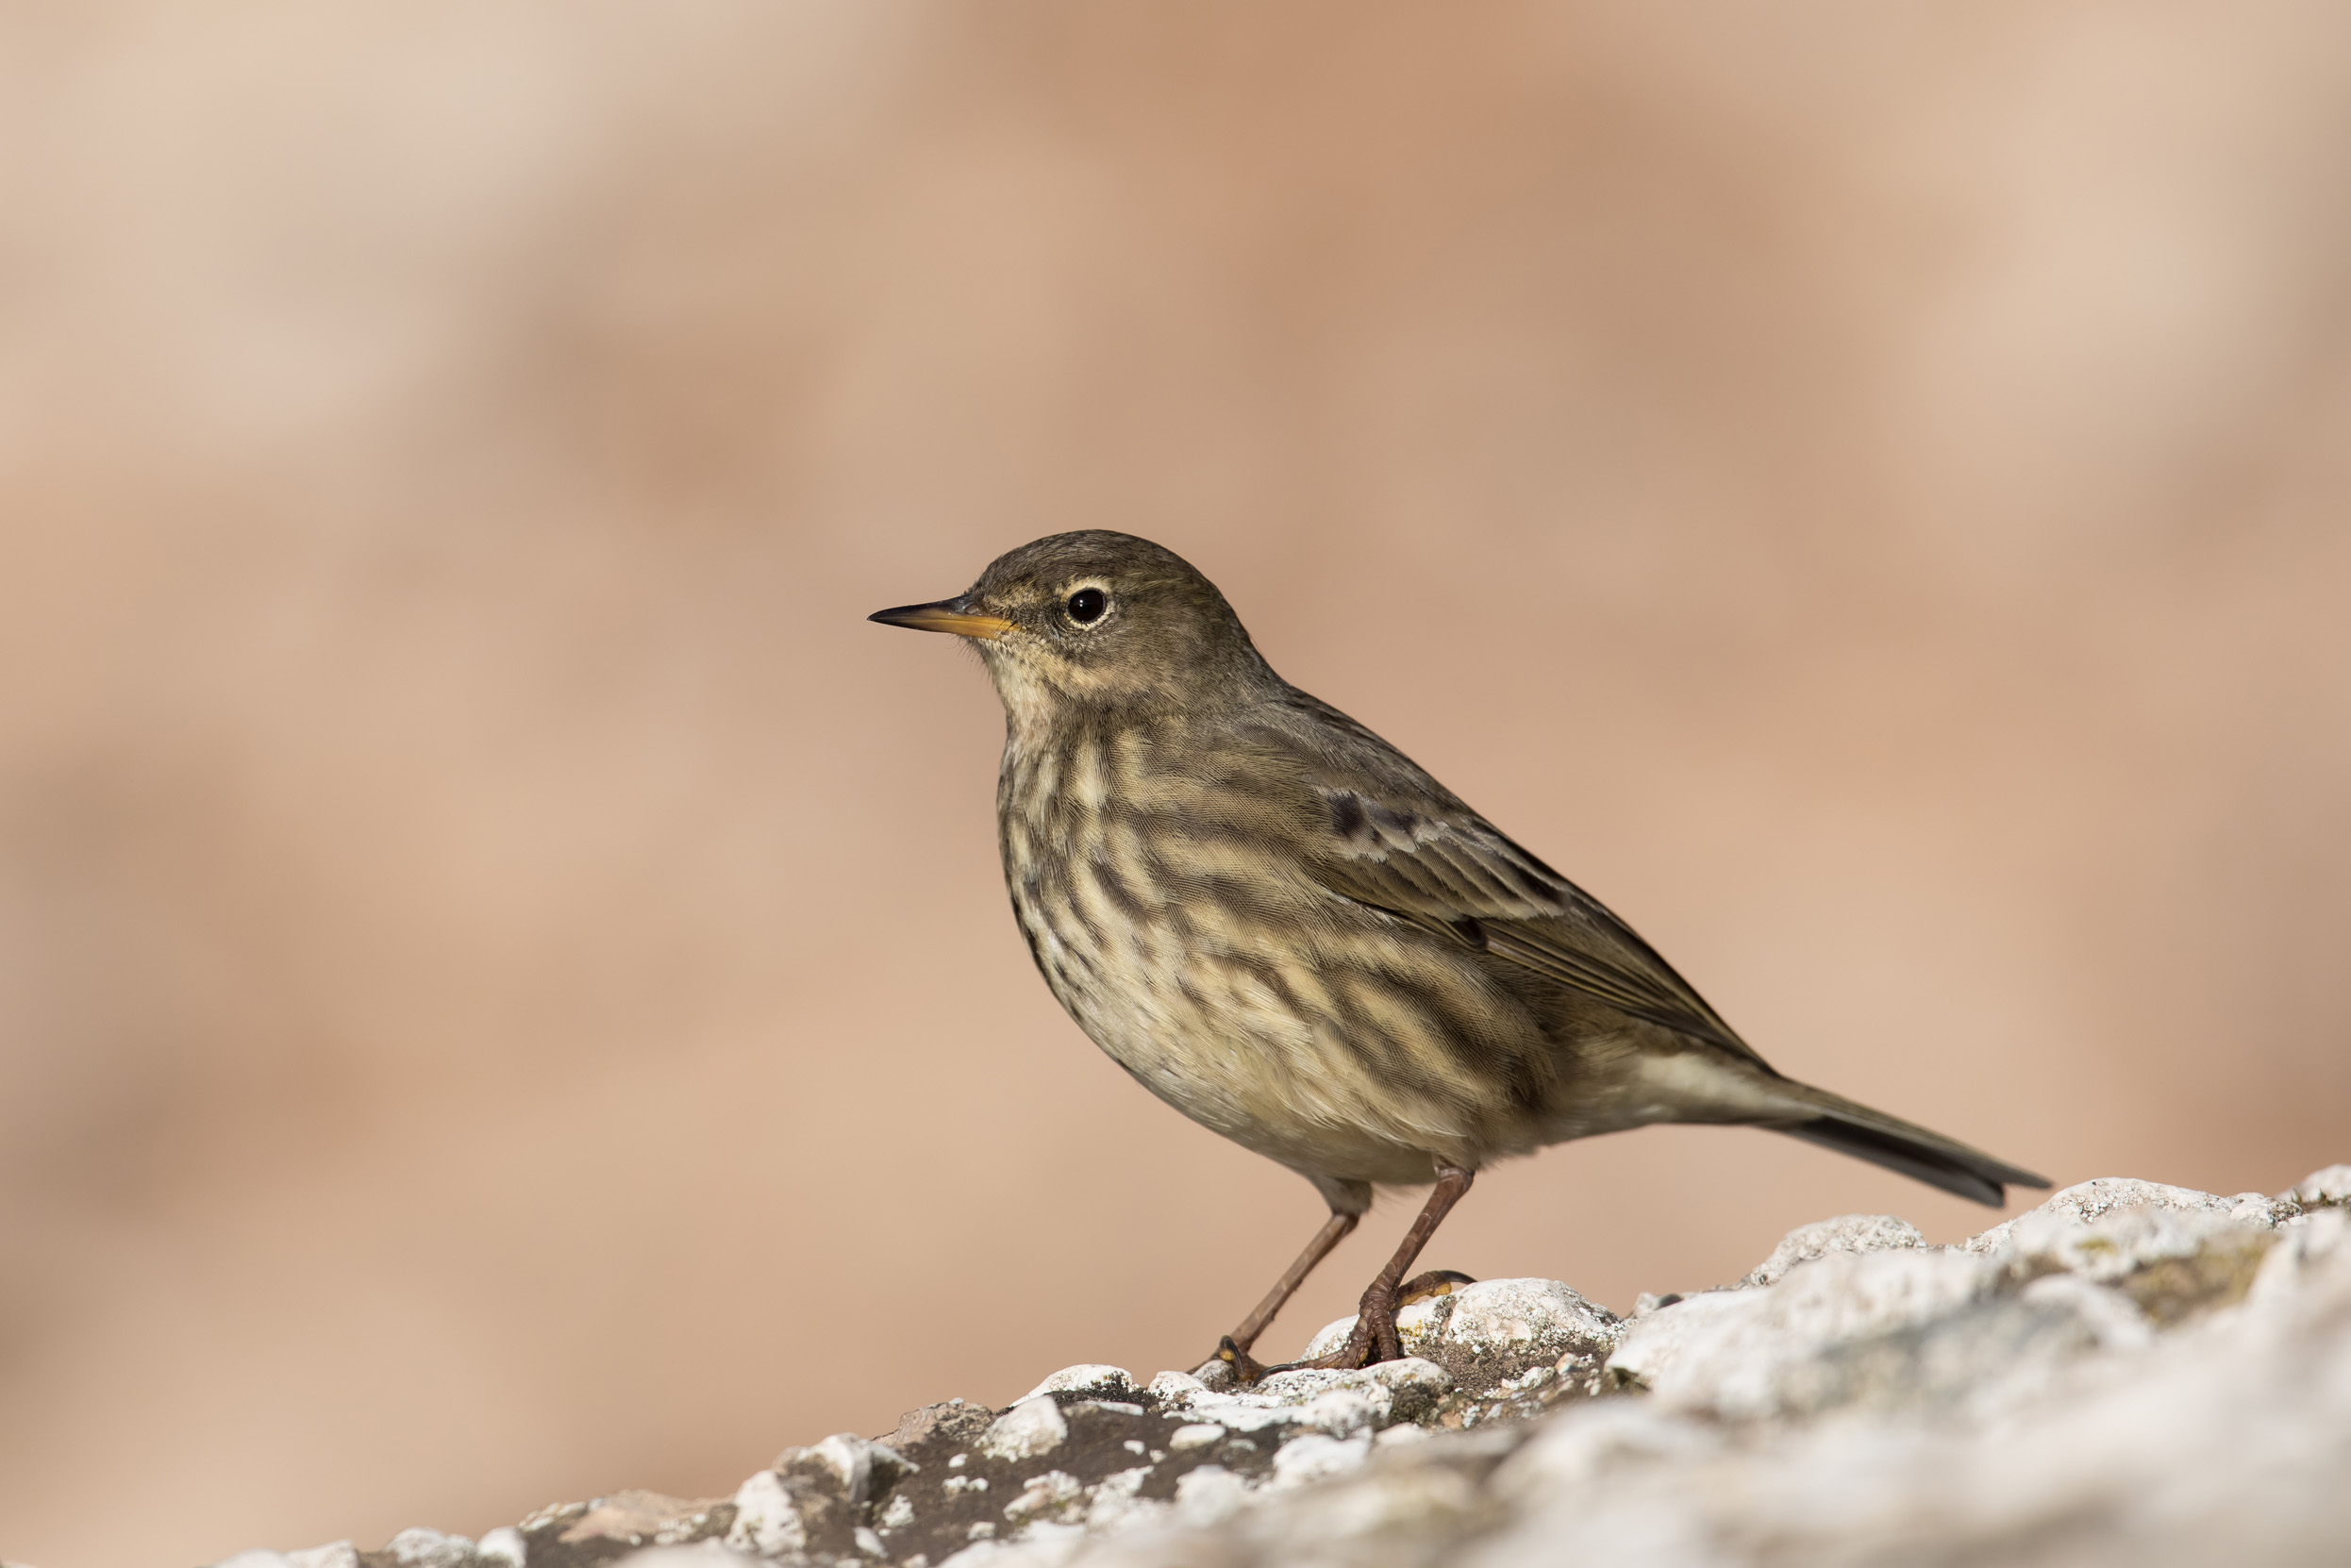 A lone Rock Pipit stood on the edge of a rock.